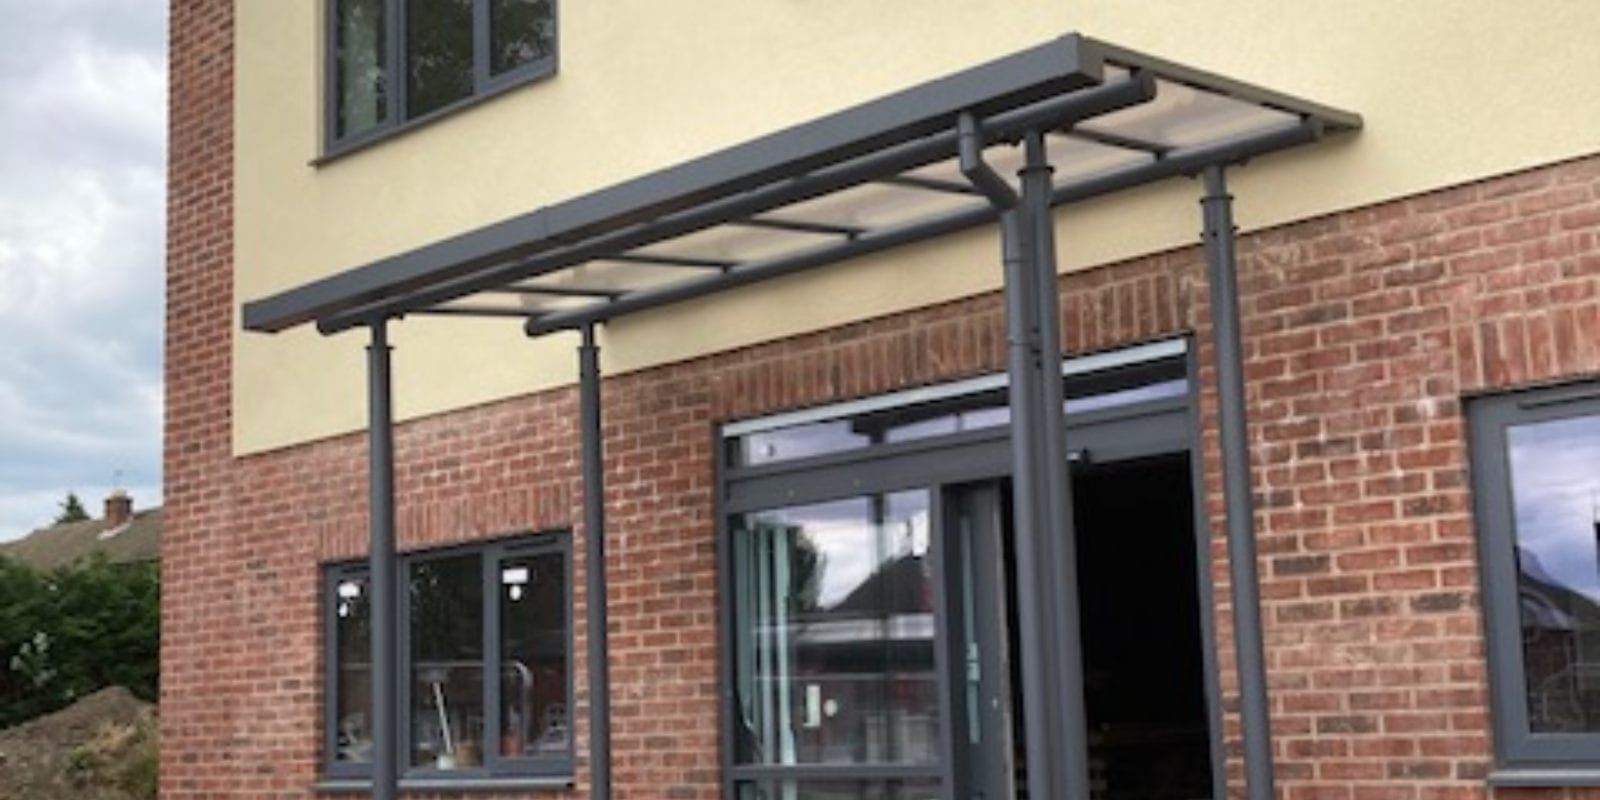 Entrance canopy we made for Great Barr Medical Centre